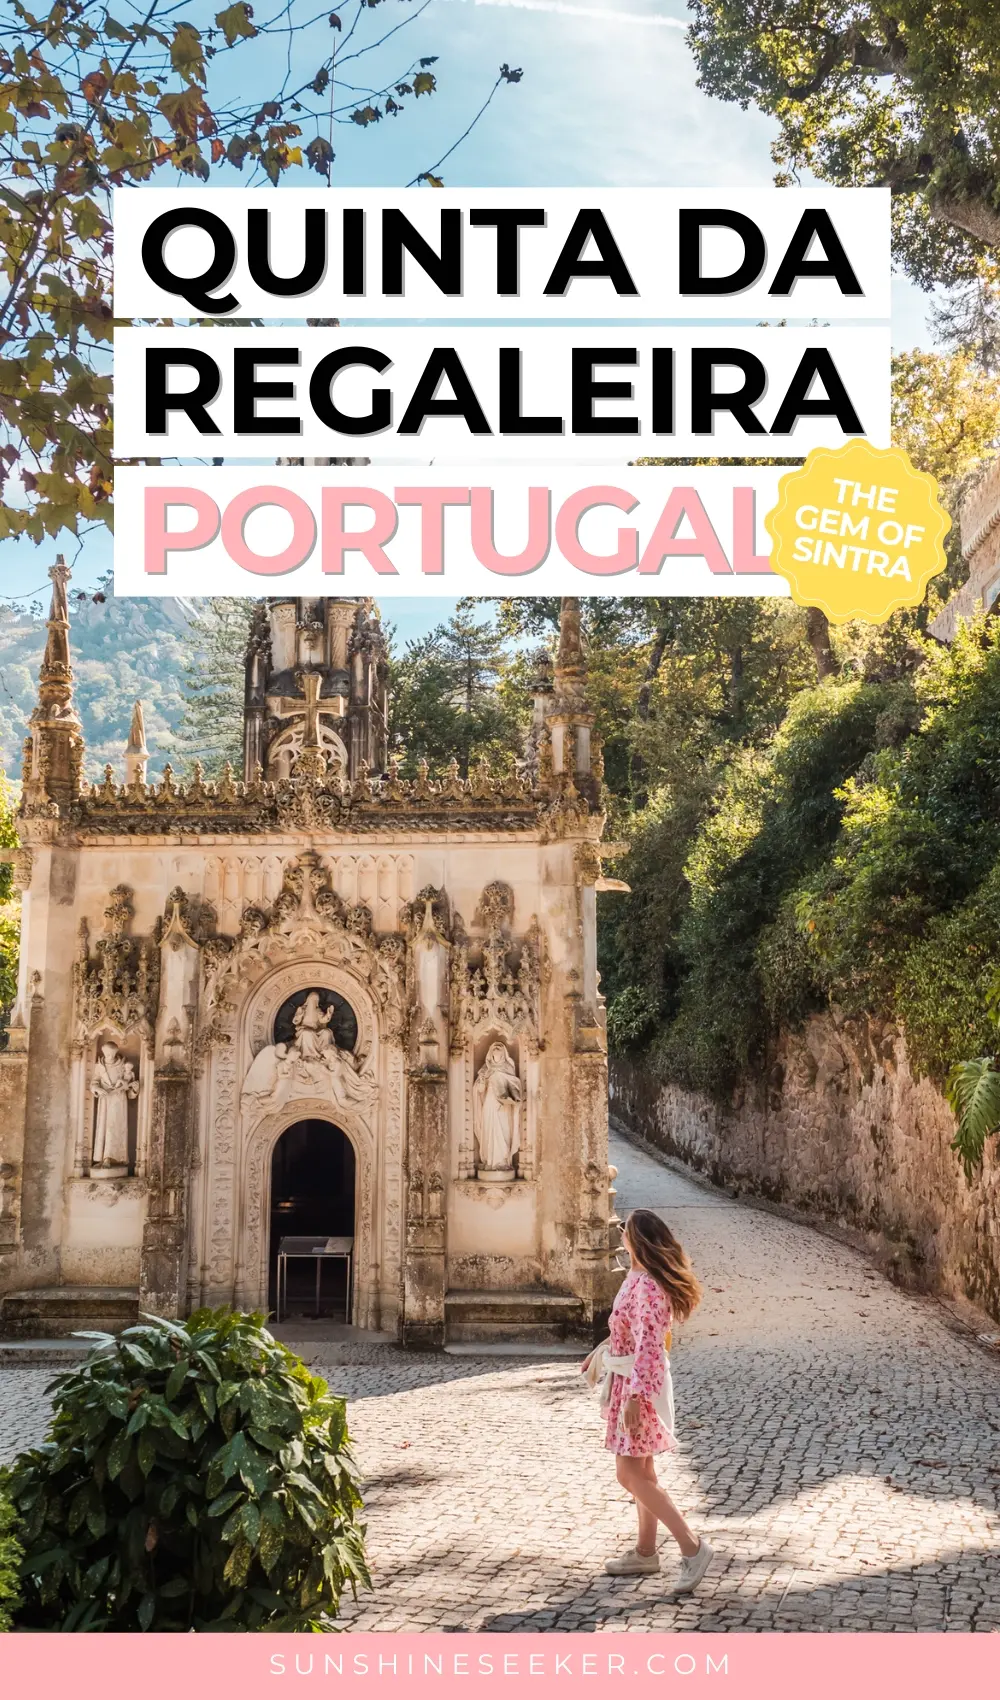 Click through for a complete guide to visiting Quinta da Regaleira, the most beautiful palace in Sintra Portugal.